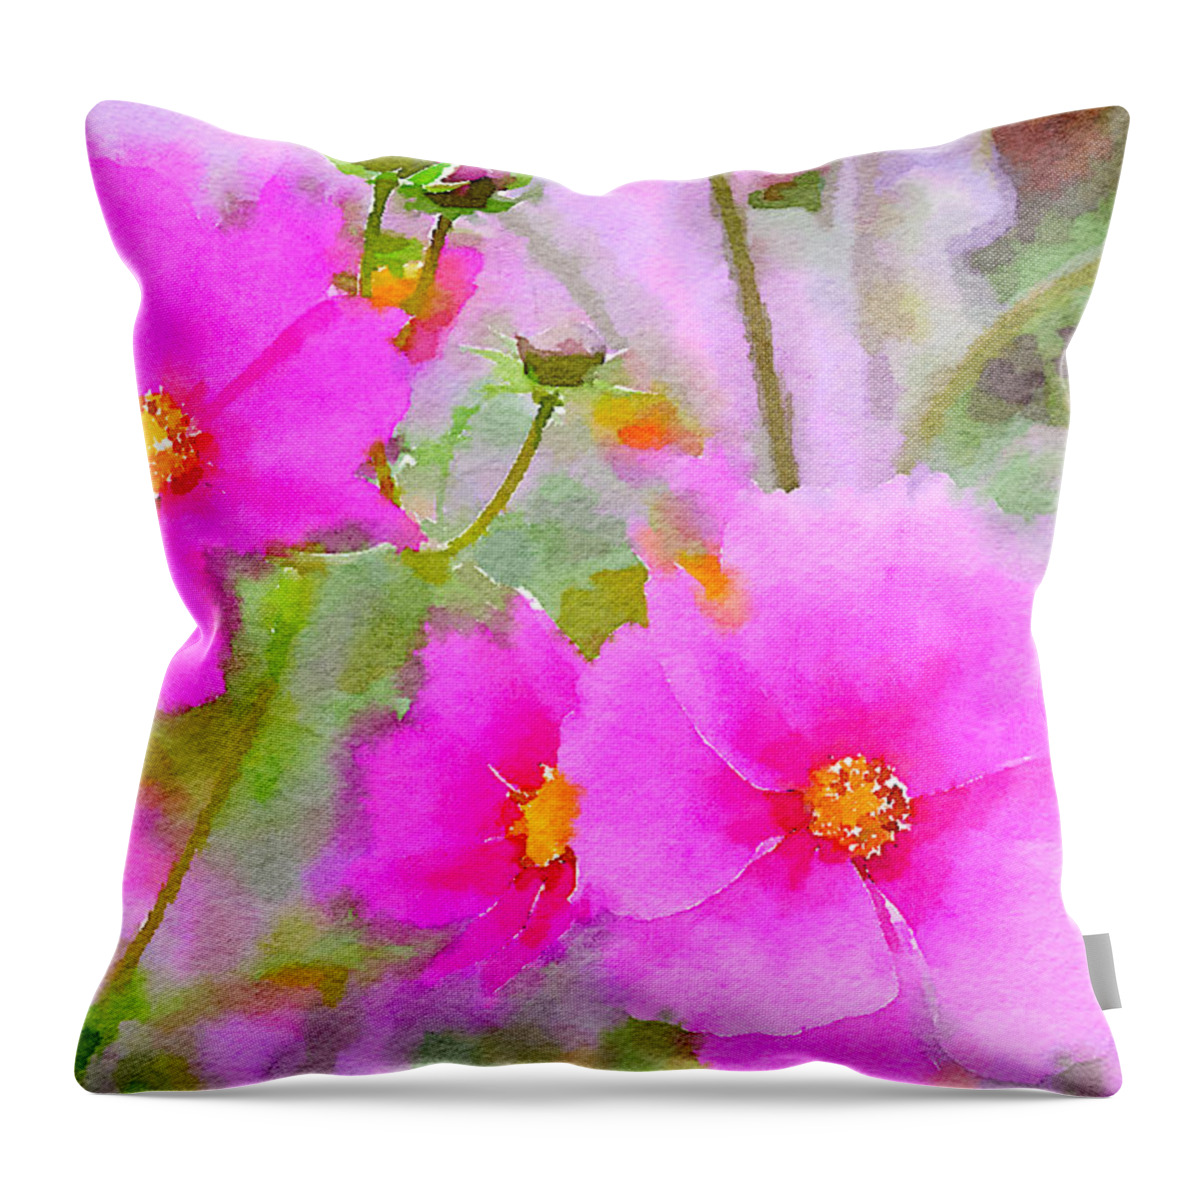 Watercolor Floral Throw Pillow featuring the painting Watercolor Pink Cosmos by Bonnie Bruno